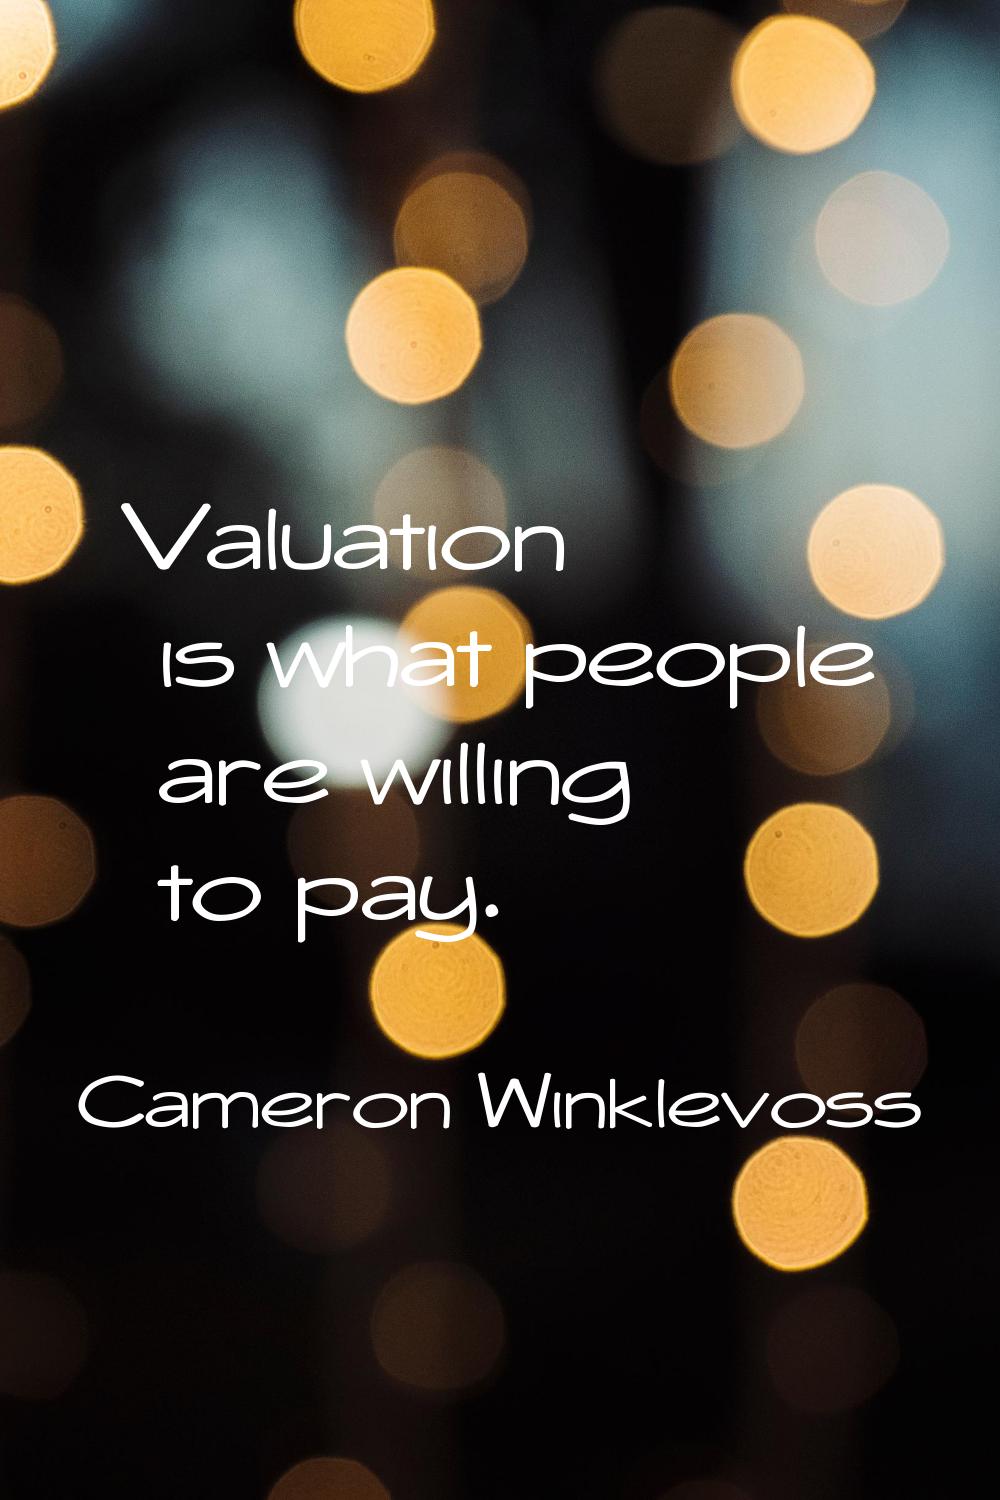 Valuation is what people are willing to pay.